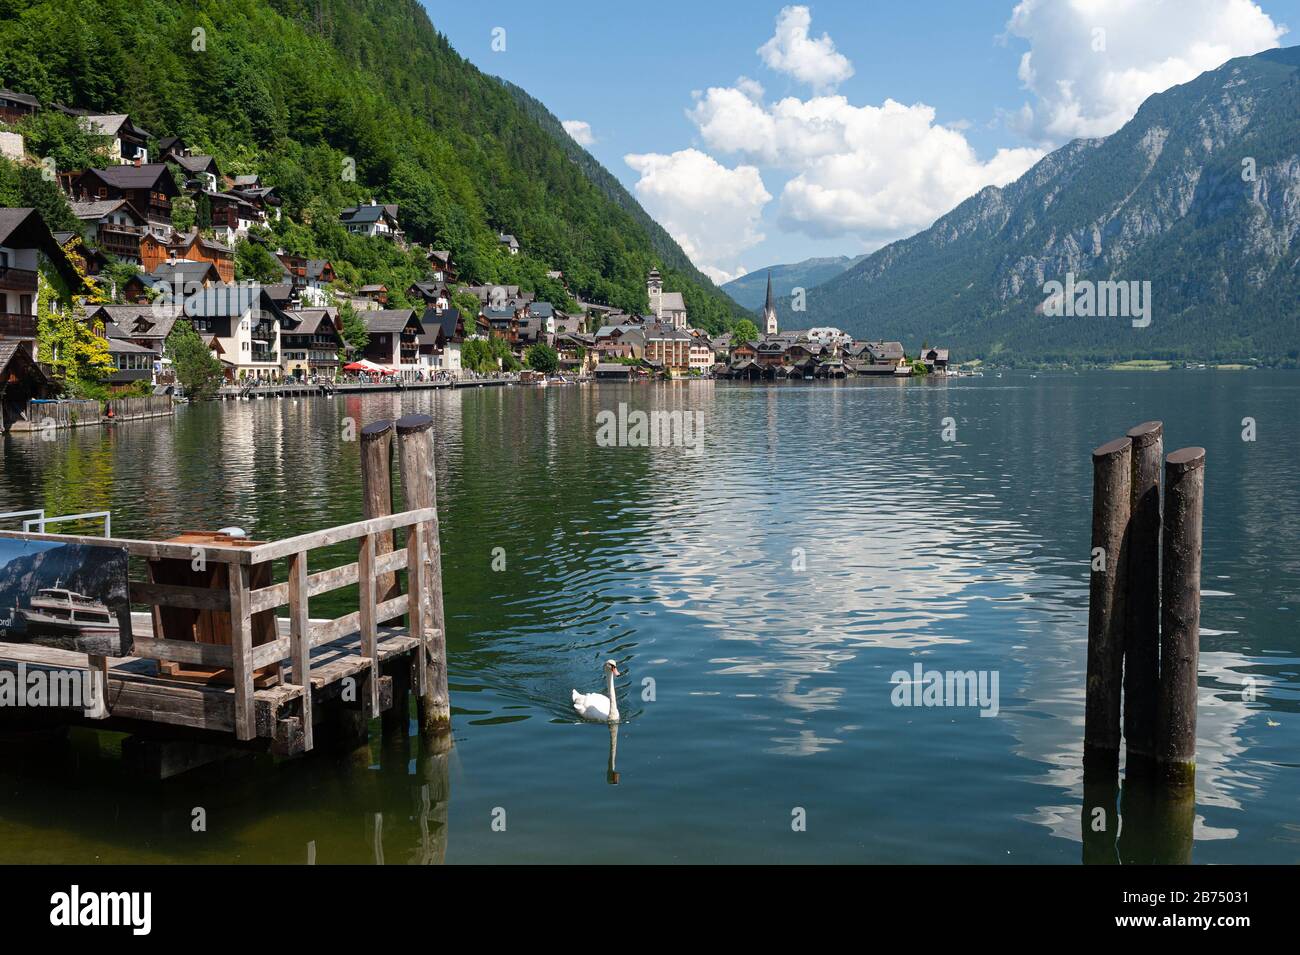 18.06.2019, Hallstatt, Upper Austria, Austria, Europe - View from the shore of the lake Hallstaetter See to the village at the mountainside. The place is a favorite travel destination of Chinese and exists as a replica in the Guangdong province in China. [automated translation] Stock Photo